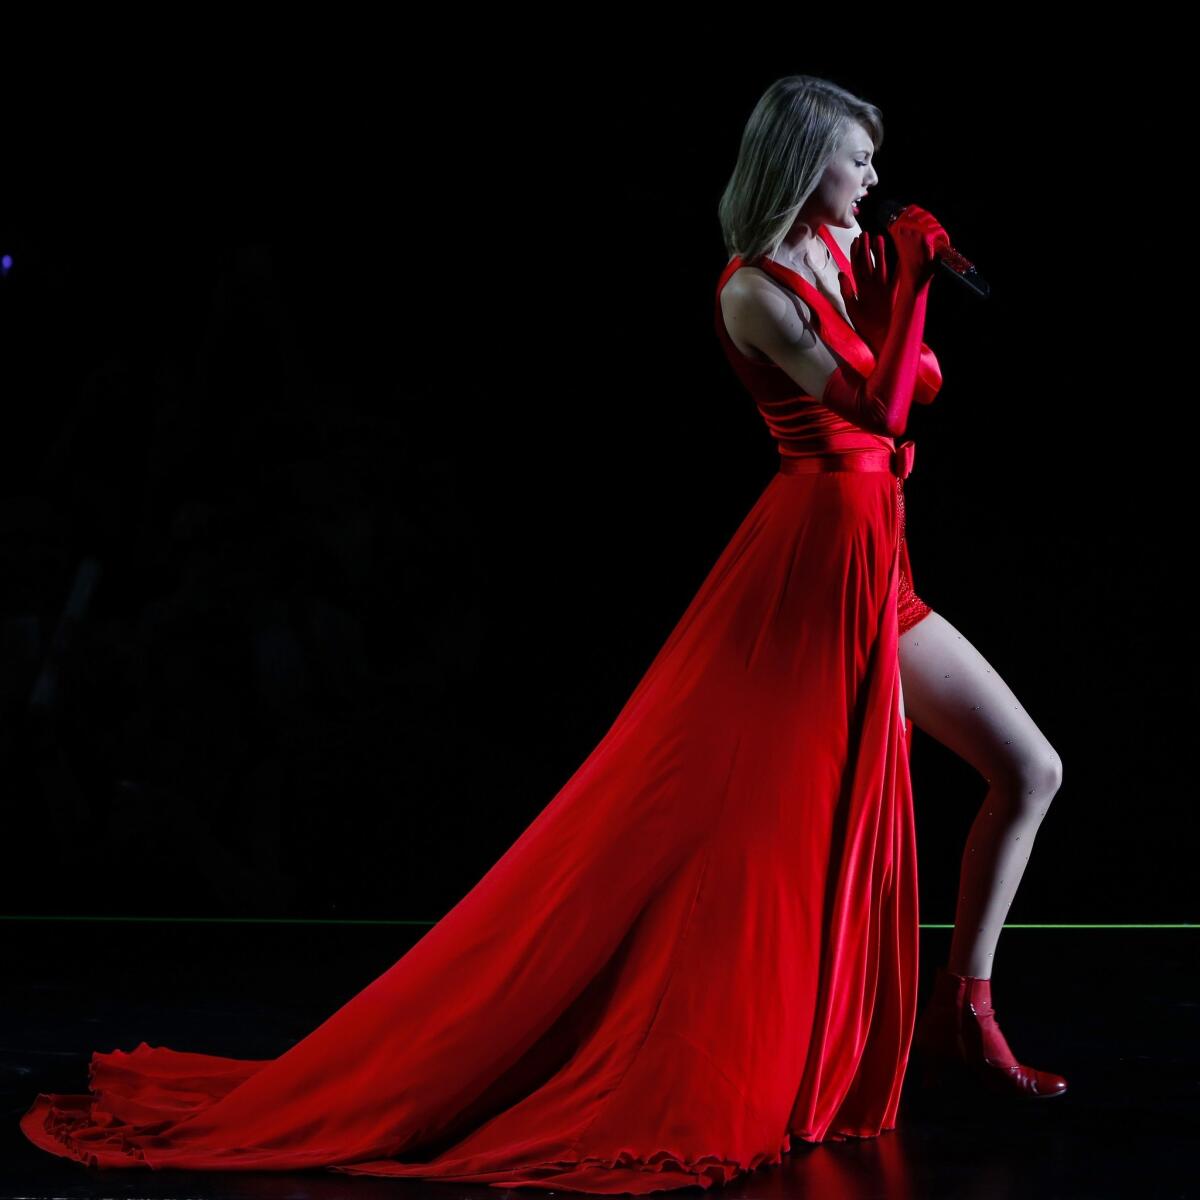 Taylor Swift, shown during a "Red" tour stop in Shanghai earlier this year, is the focus of a new exhibit opening Dec. 13 at the Grammy Museum in Los Angeles. The exhibit will include costumes from the "Red" tour and other artifacts and memorabilia from her life.